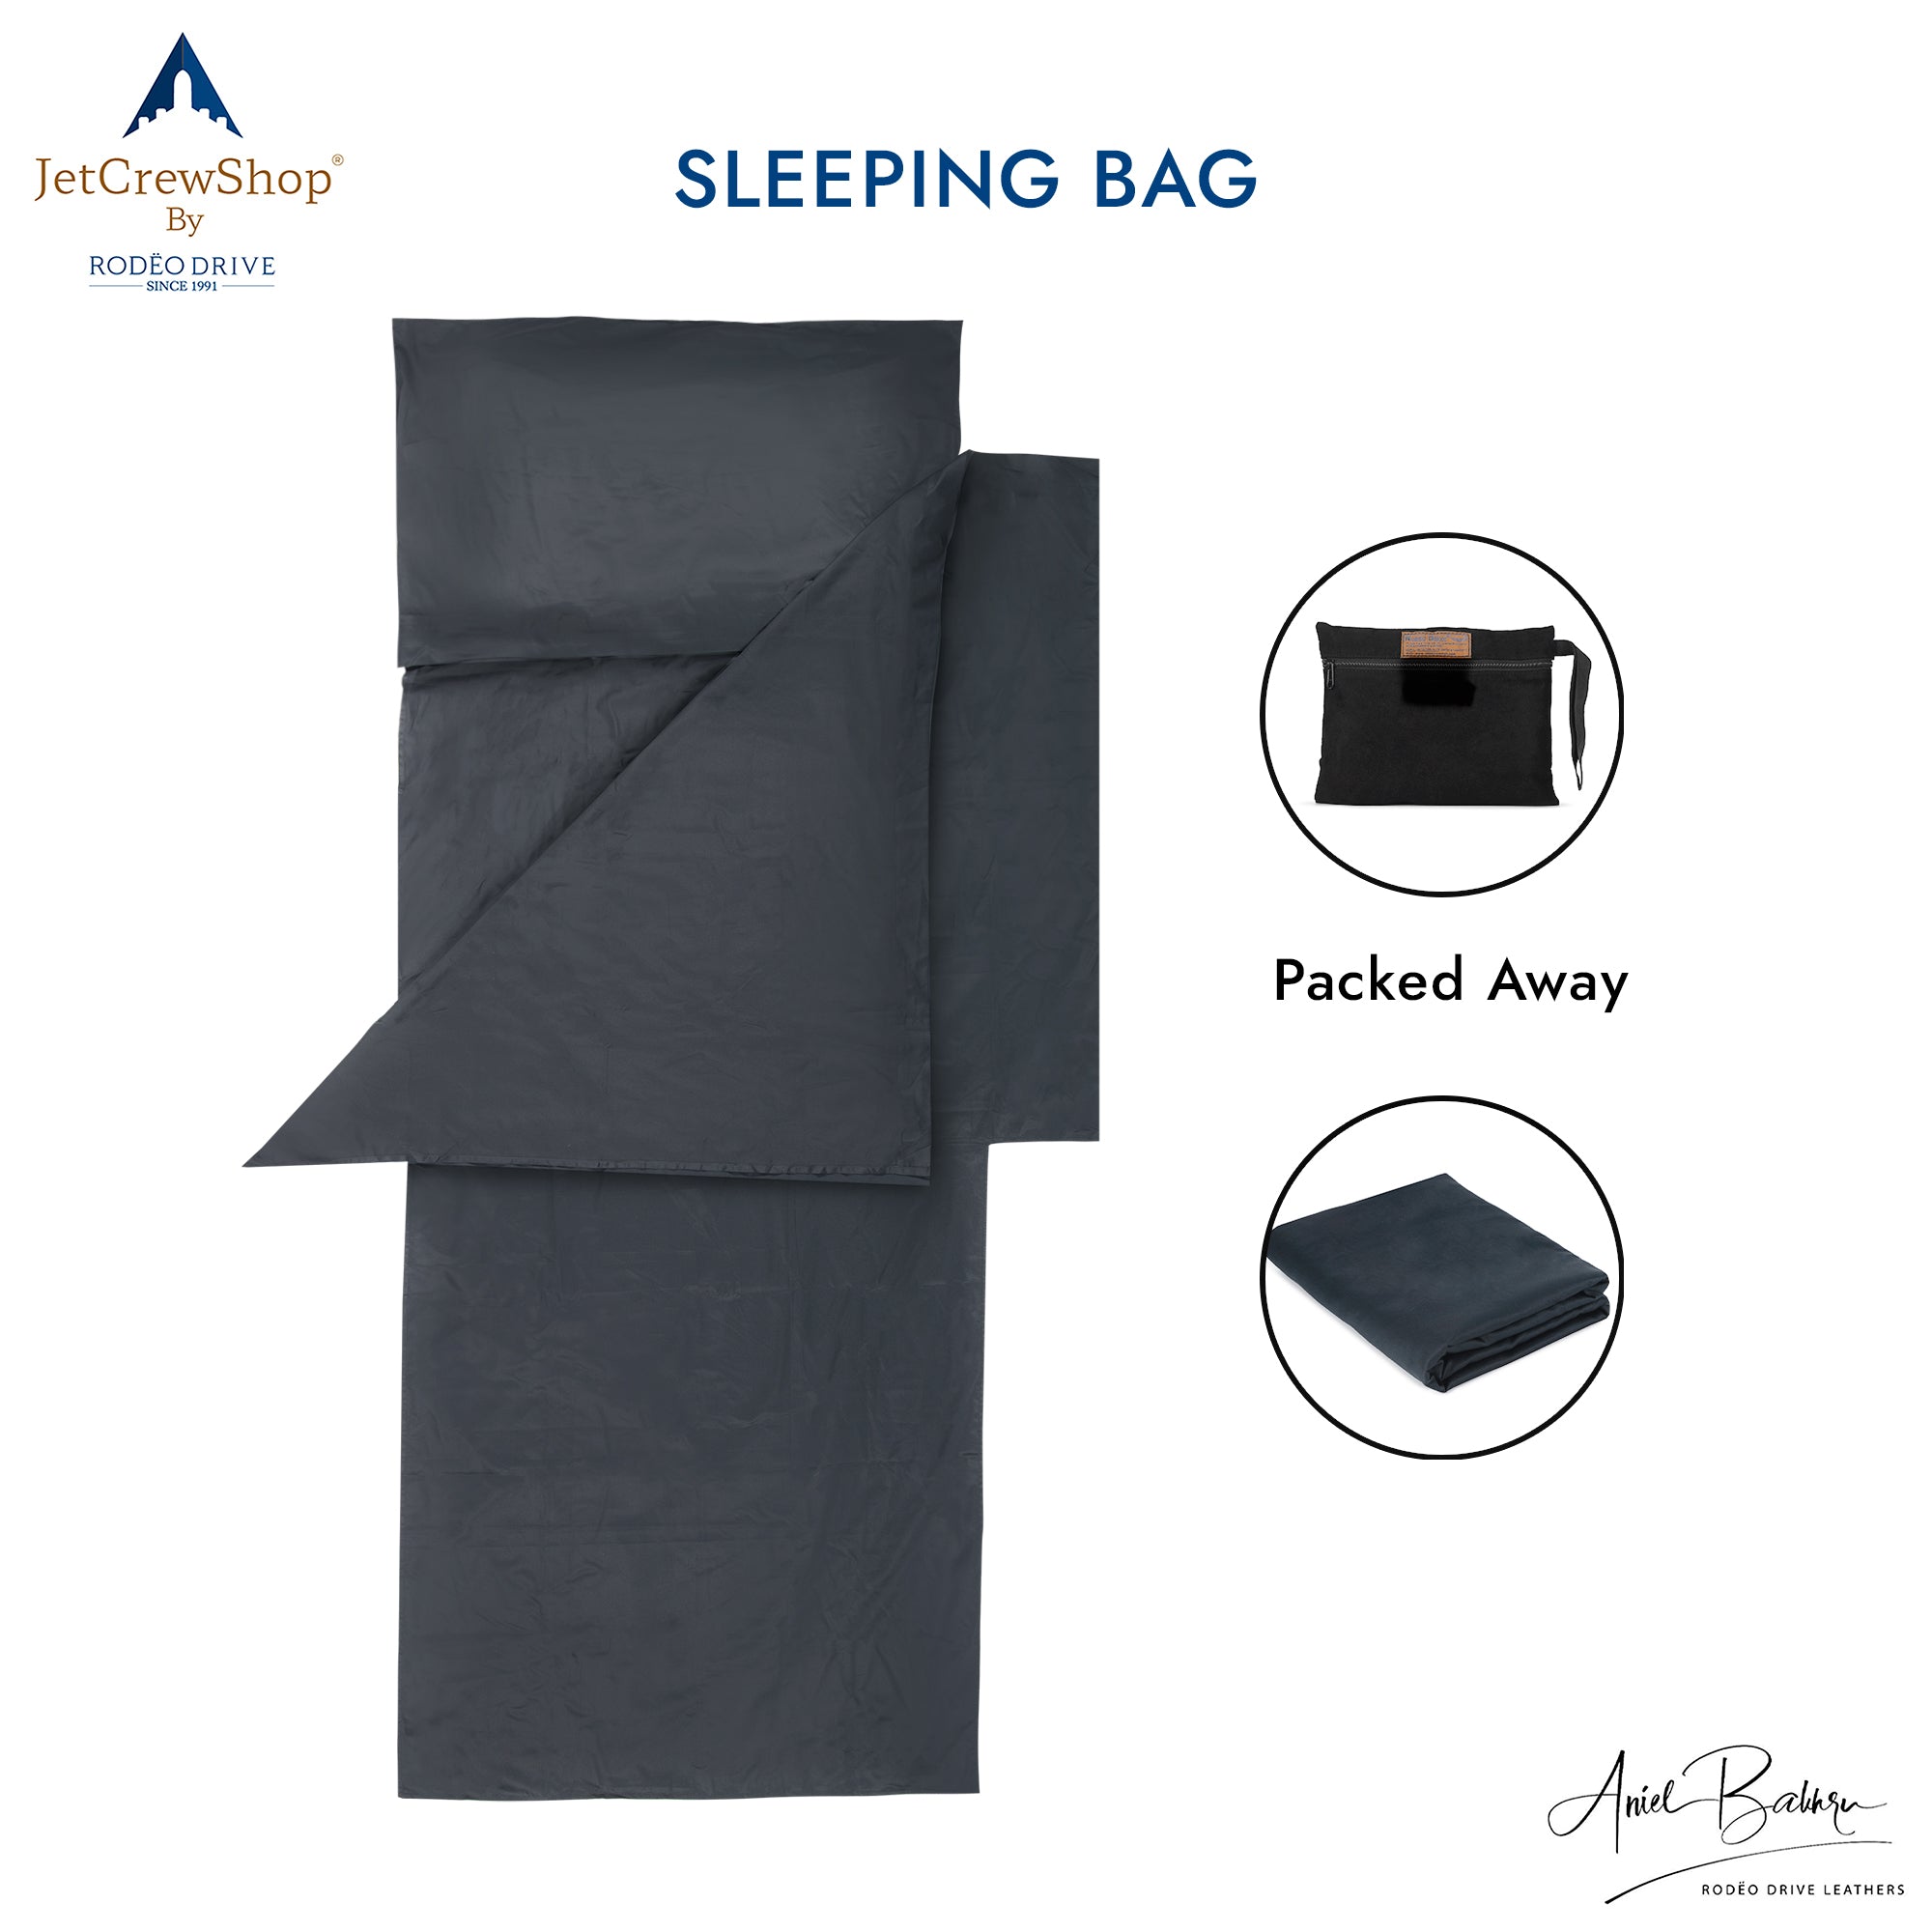 Open sleeping bag image. Two more images depict it in folded and packed pattern.